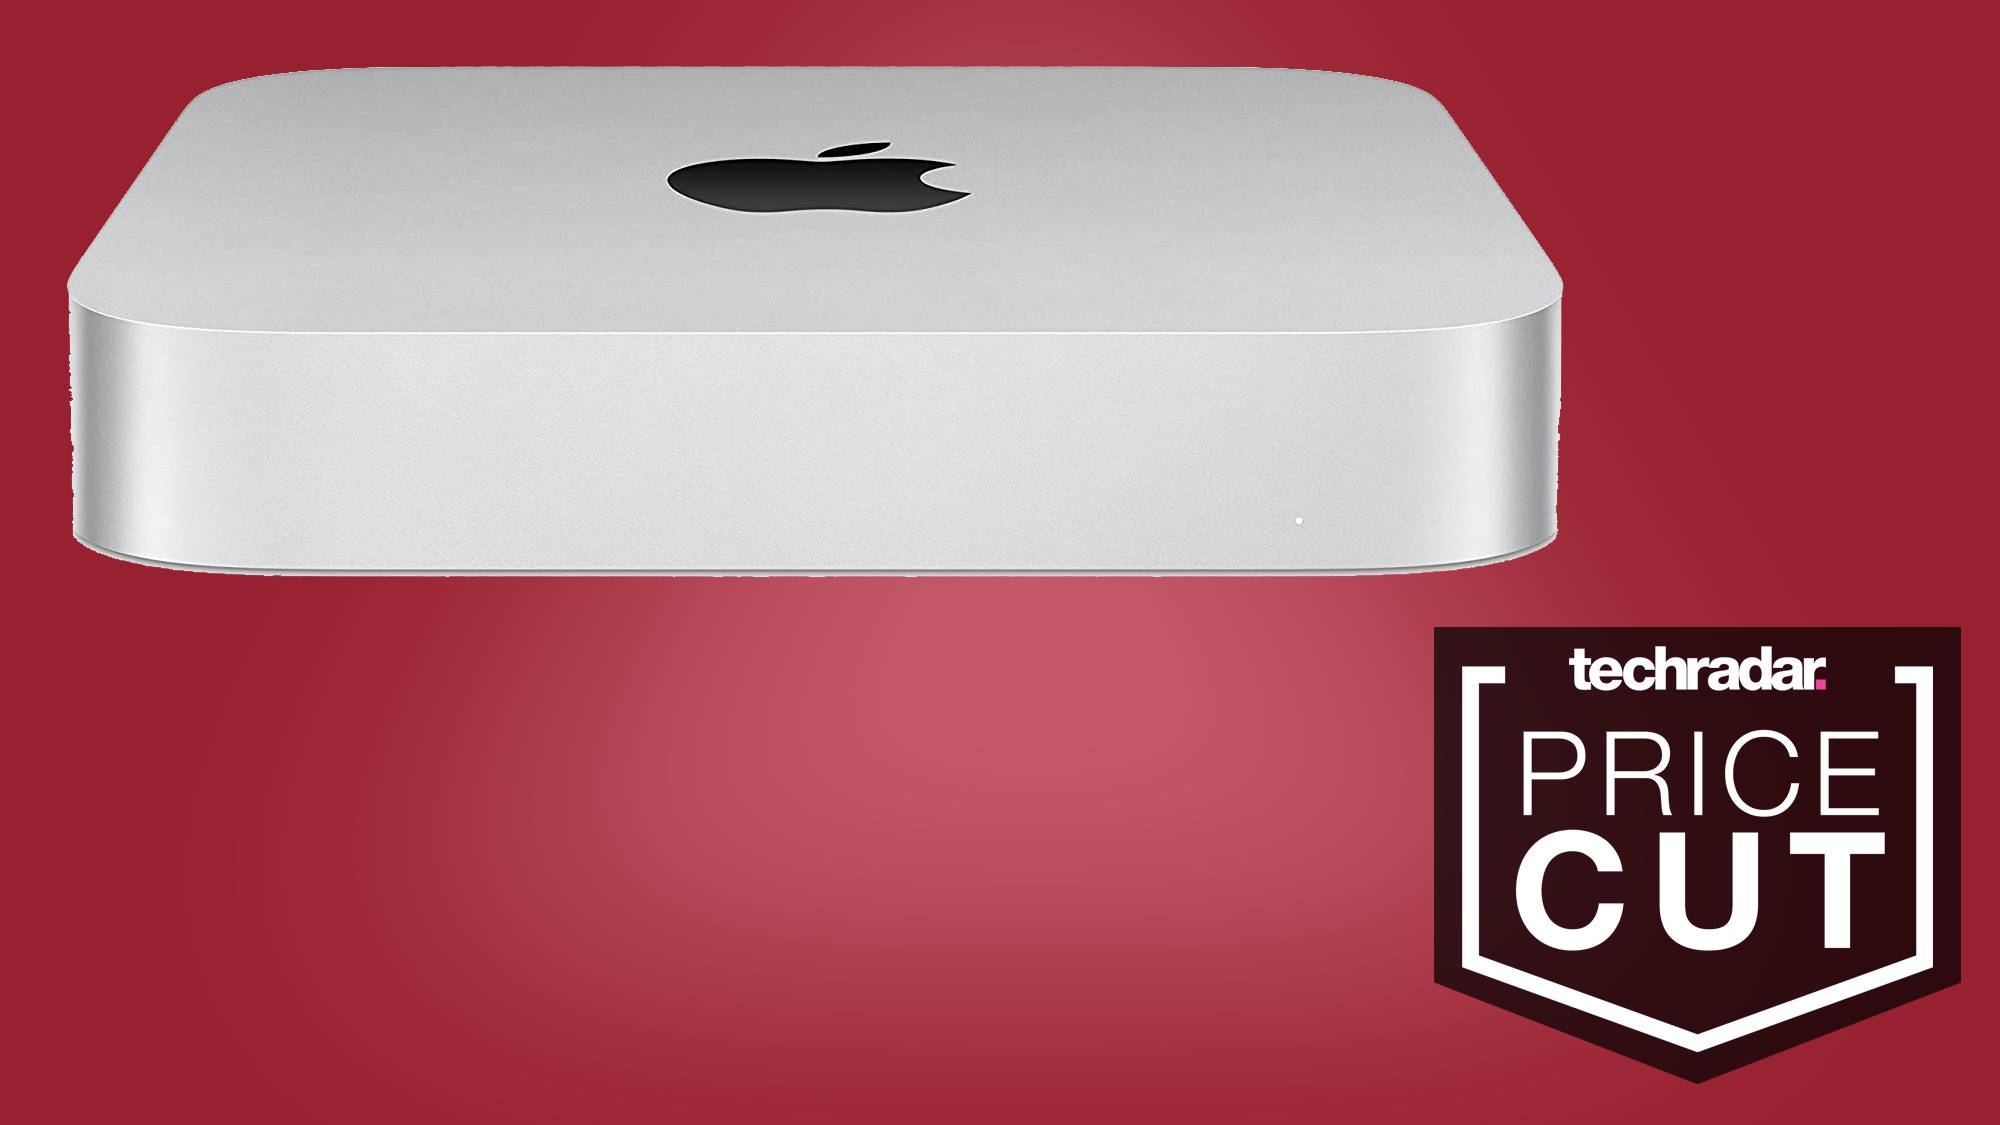 This $499 M2 Mac Mini could finally convince me to buy an Apple device - How about you?